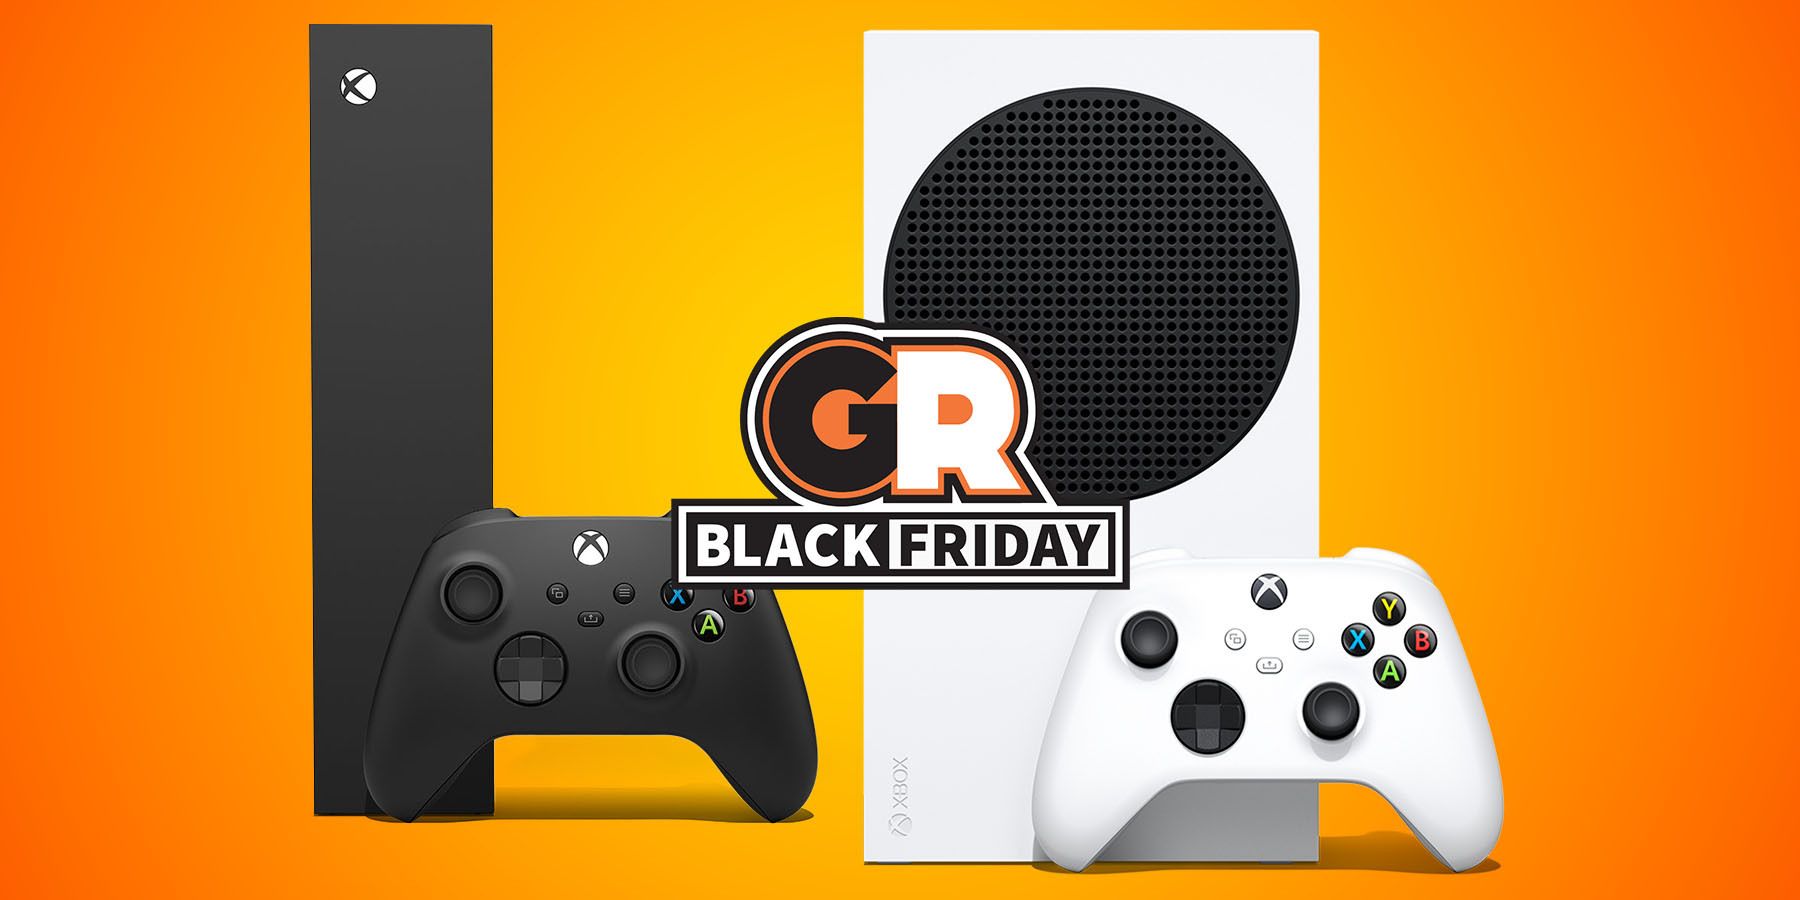 Dive Into Black Friday Deals! by This Week on Xbox